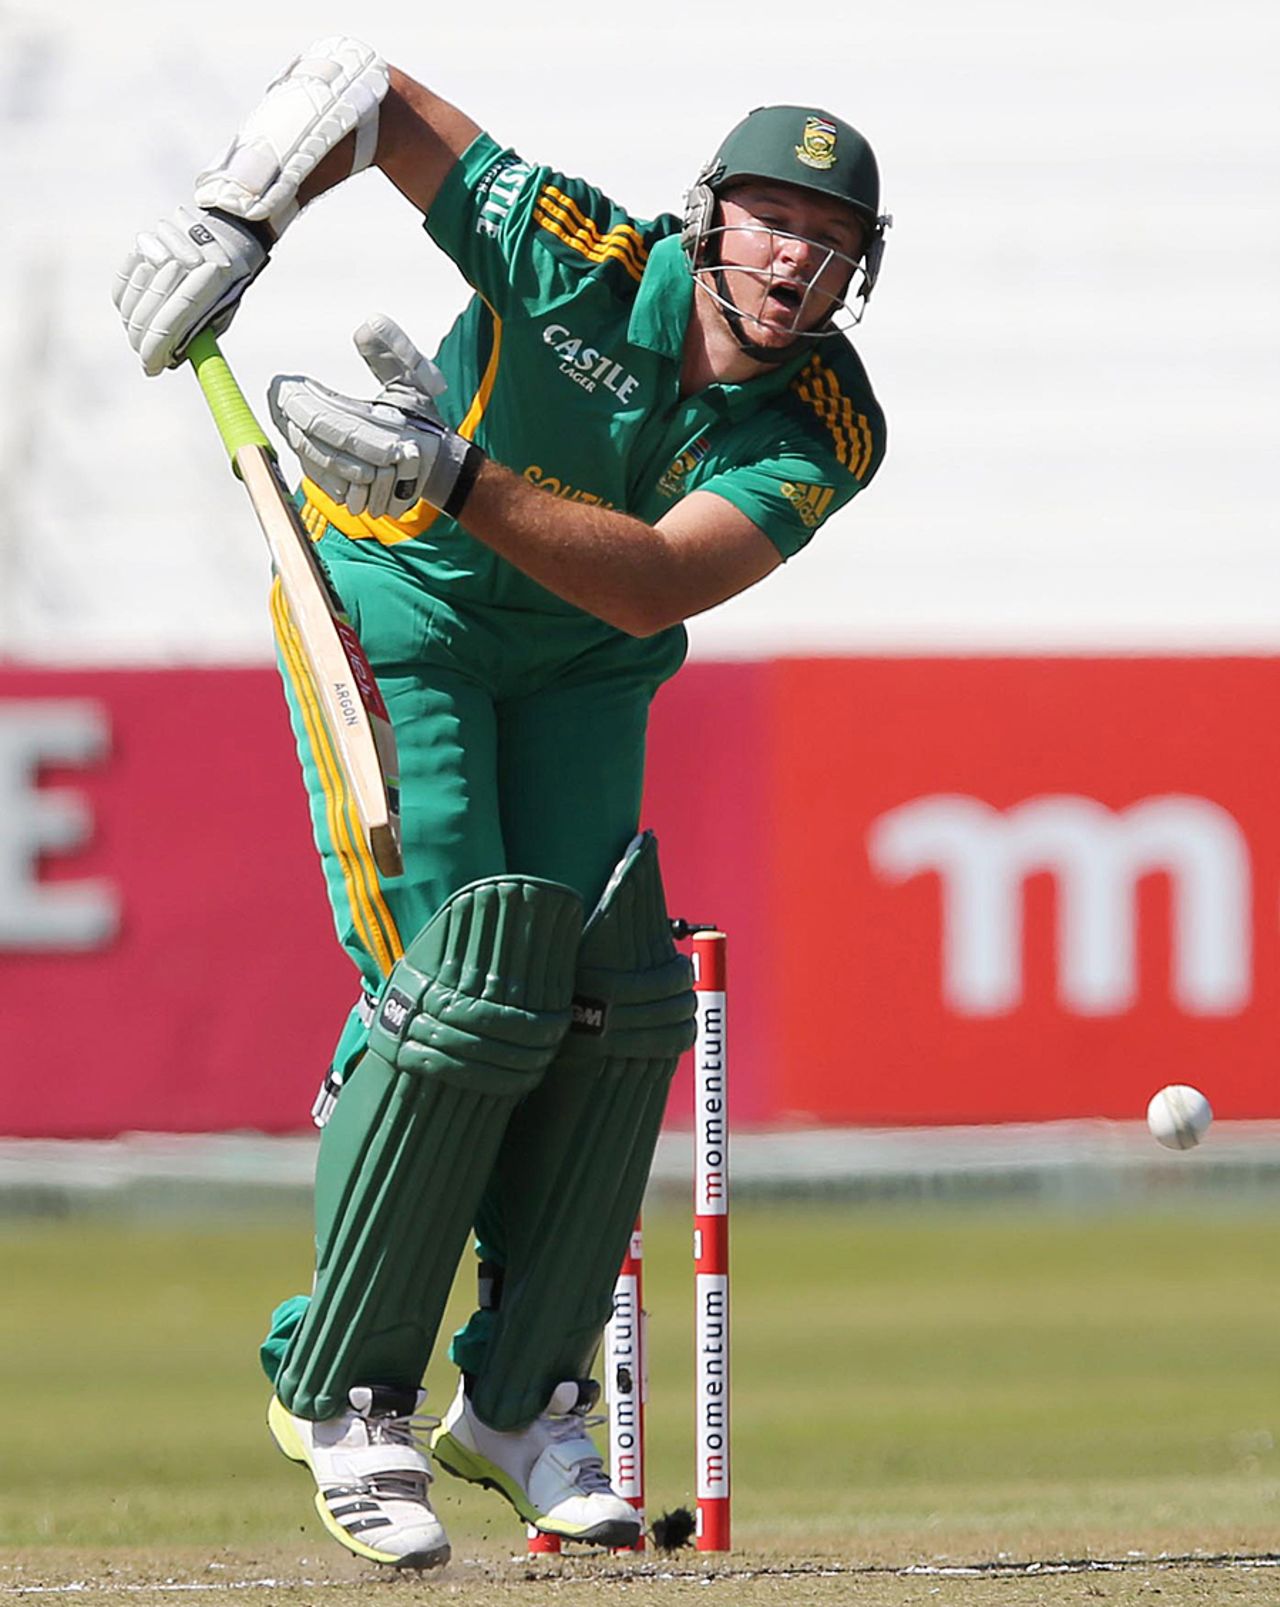 Graeme Smith gets hit by a delivery, South Africa v Pakistan, 4th ODI, Durban, March 21, 2013